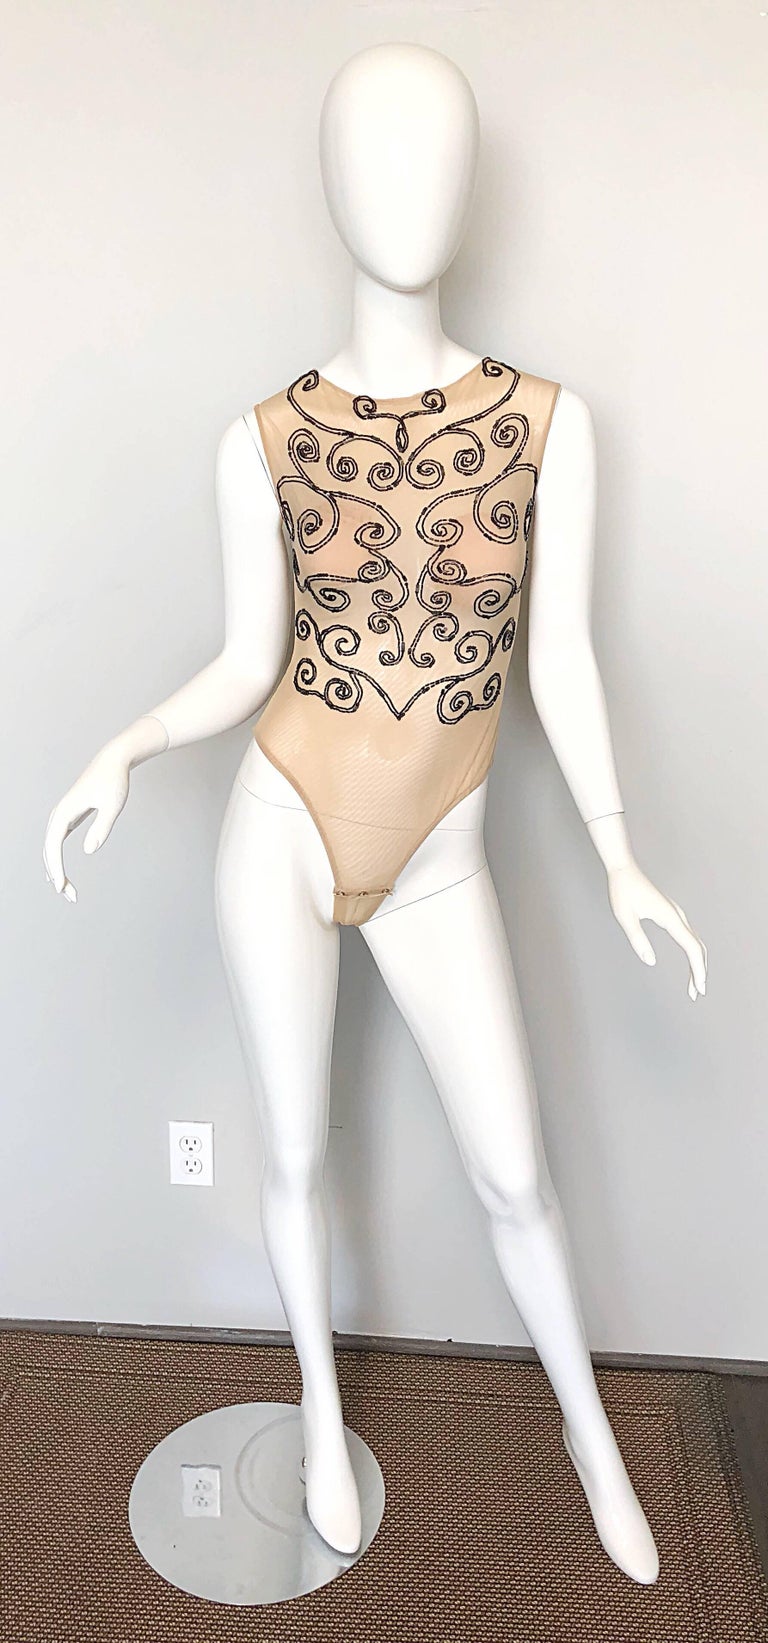 https://a.1stdibscdn.com/cd-greene-couture-1990s-nude--black-sexy-beaded-sheer-vintage-90s-bodysuit-for-sale-picture-9/archivesE/upload/v_662/1520667327075/mobilejpegupload_037C950271CA4451ACB8FA84E0C84BD9_master.jpg?width=768